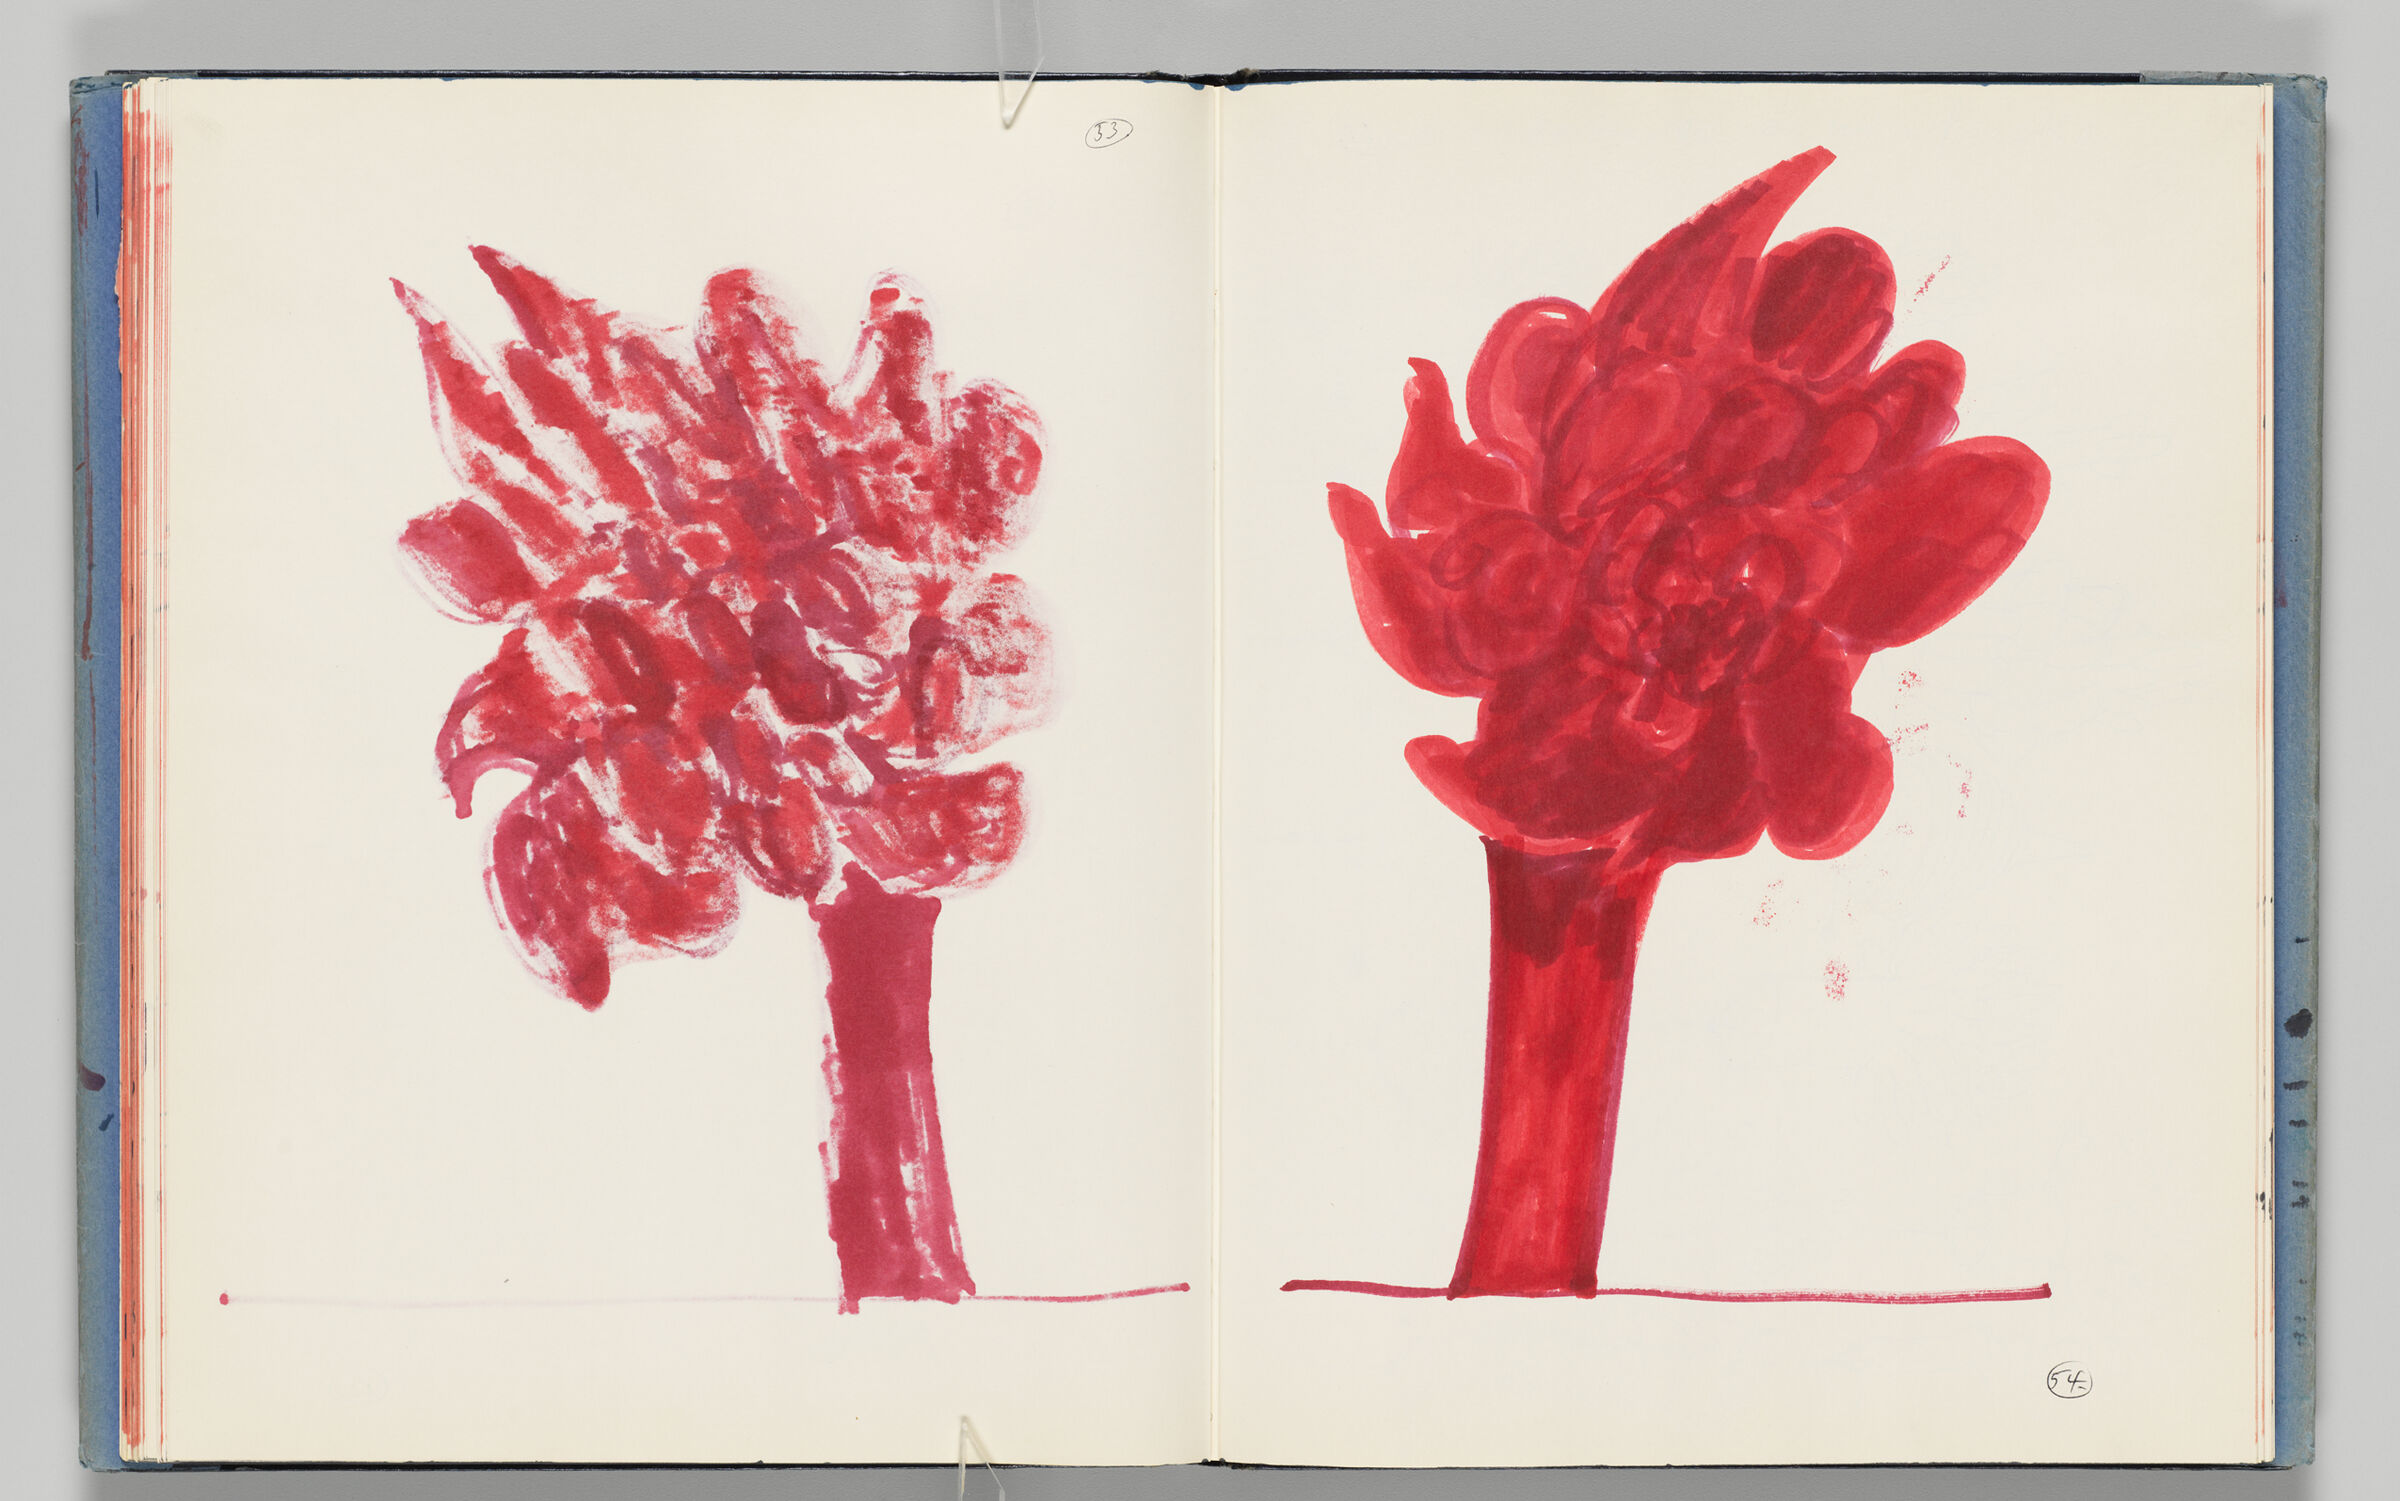 Untitled (Bleed-Through Of Previous Page With Page Number, Left Page); Untitled (Design For 